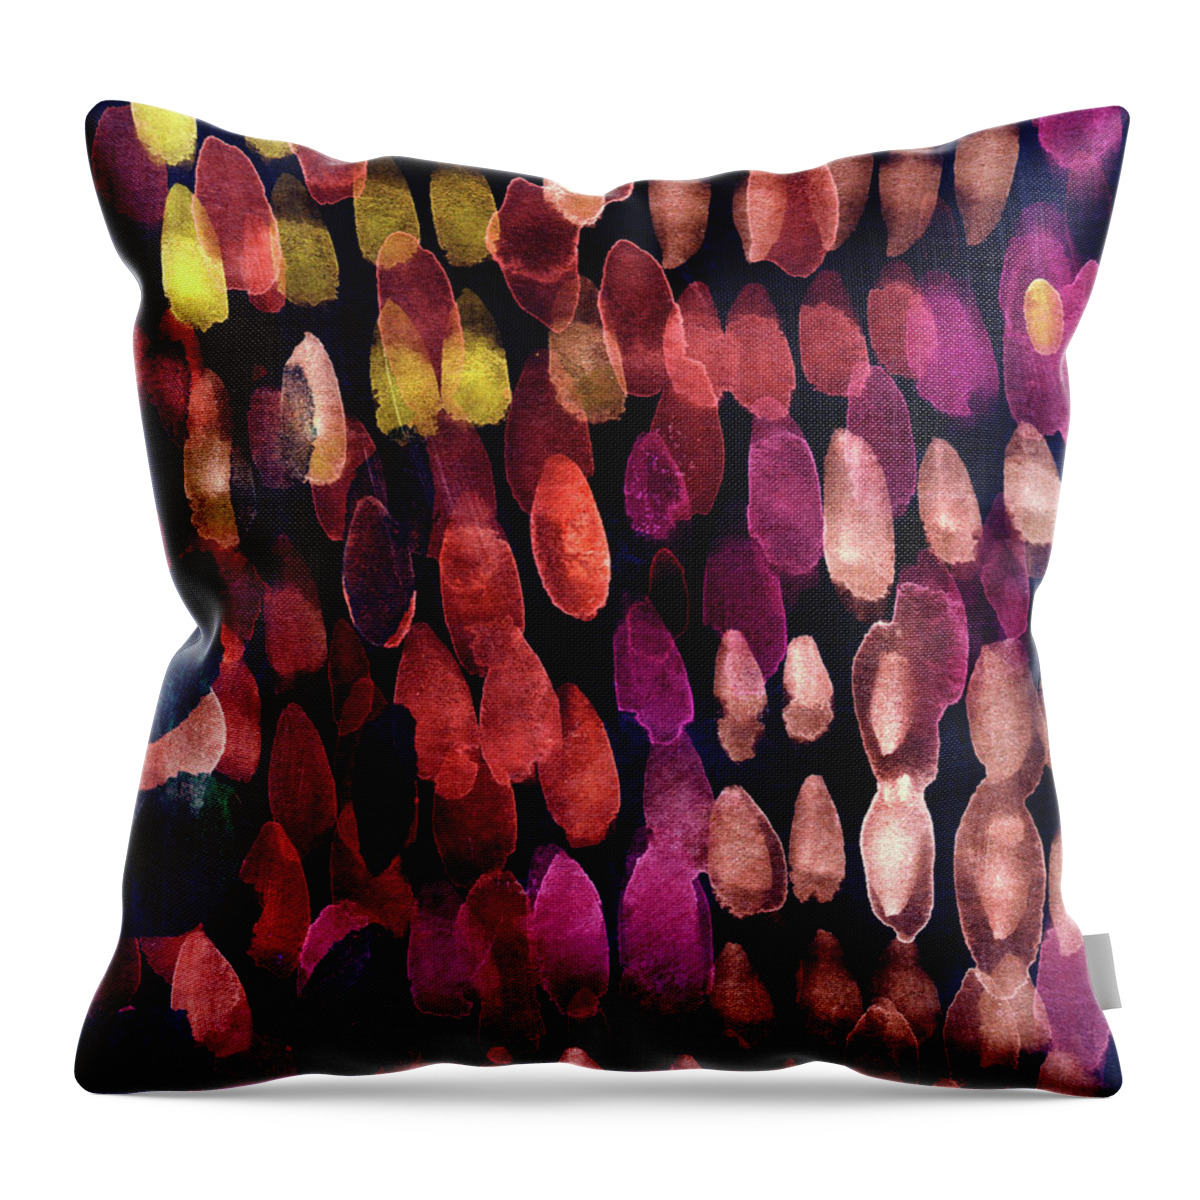 Abstract Painting Throw Pillow featuring the mixed media Jewel Drops- Abstract Art by Linda Woods by Linda Woods